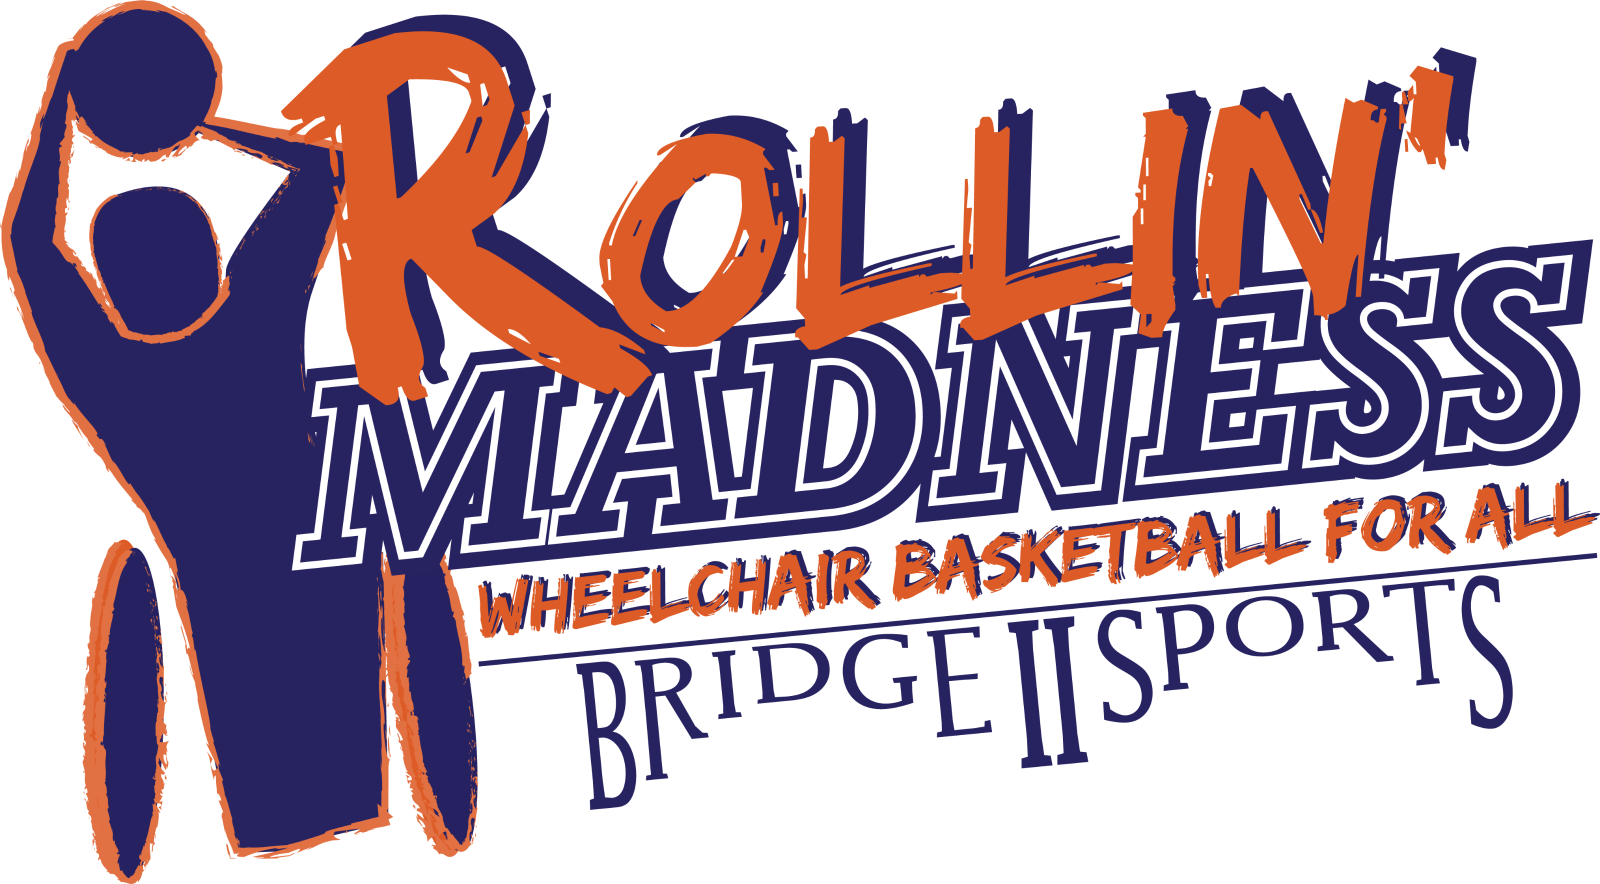 Rollin' Madness Logo, there is a stylized wheelchair basketball player on the left side, and the word rollin' is stacked on top of madness